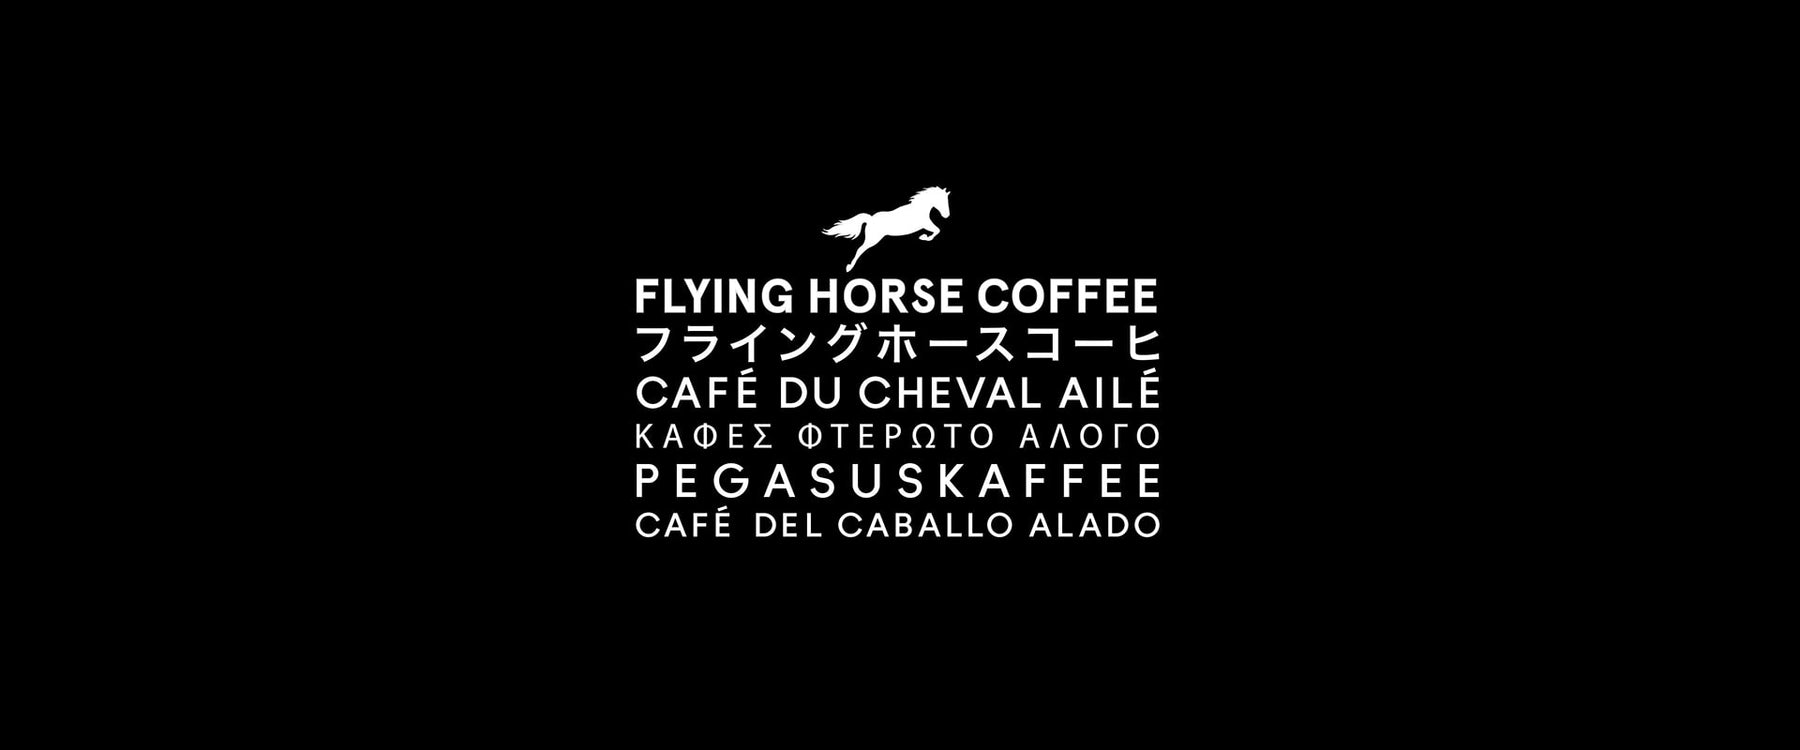 Coffee Roaster Introduction: Flying Horse Coffee